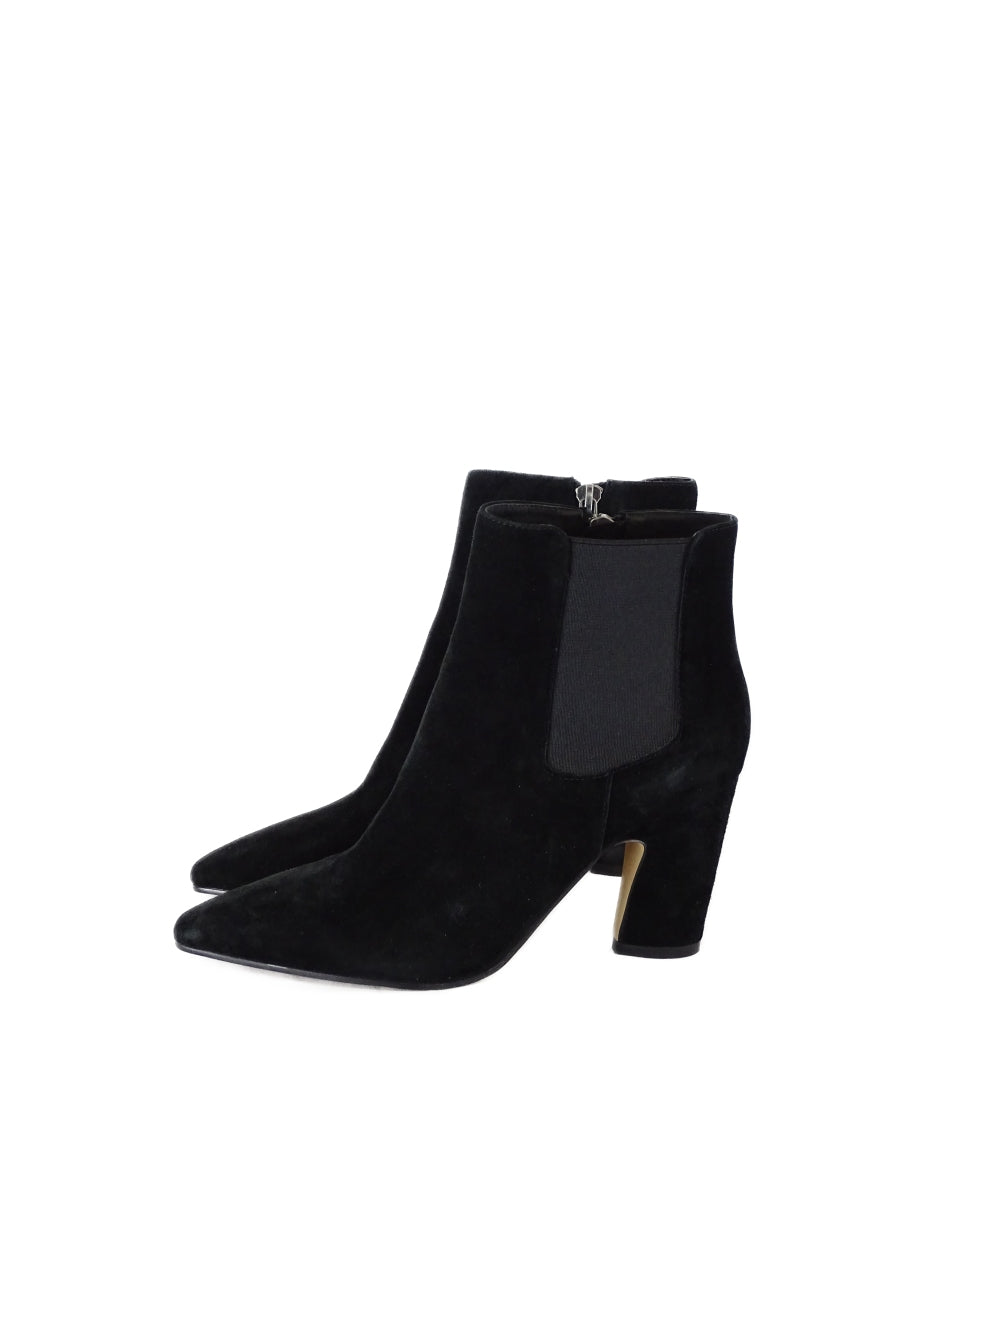 Filippo Raphael Black Suede Ankle Boots 38